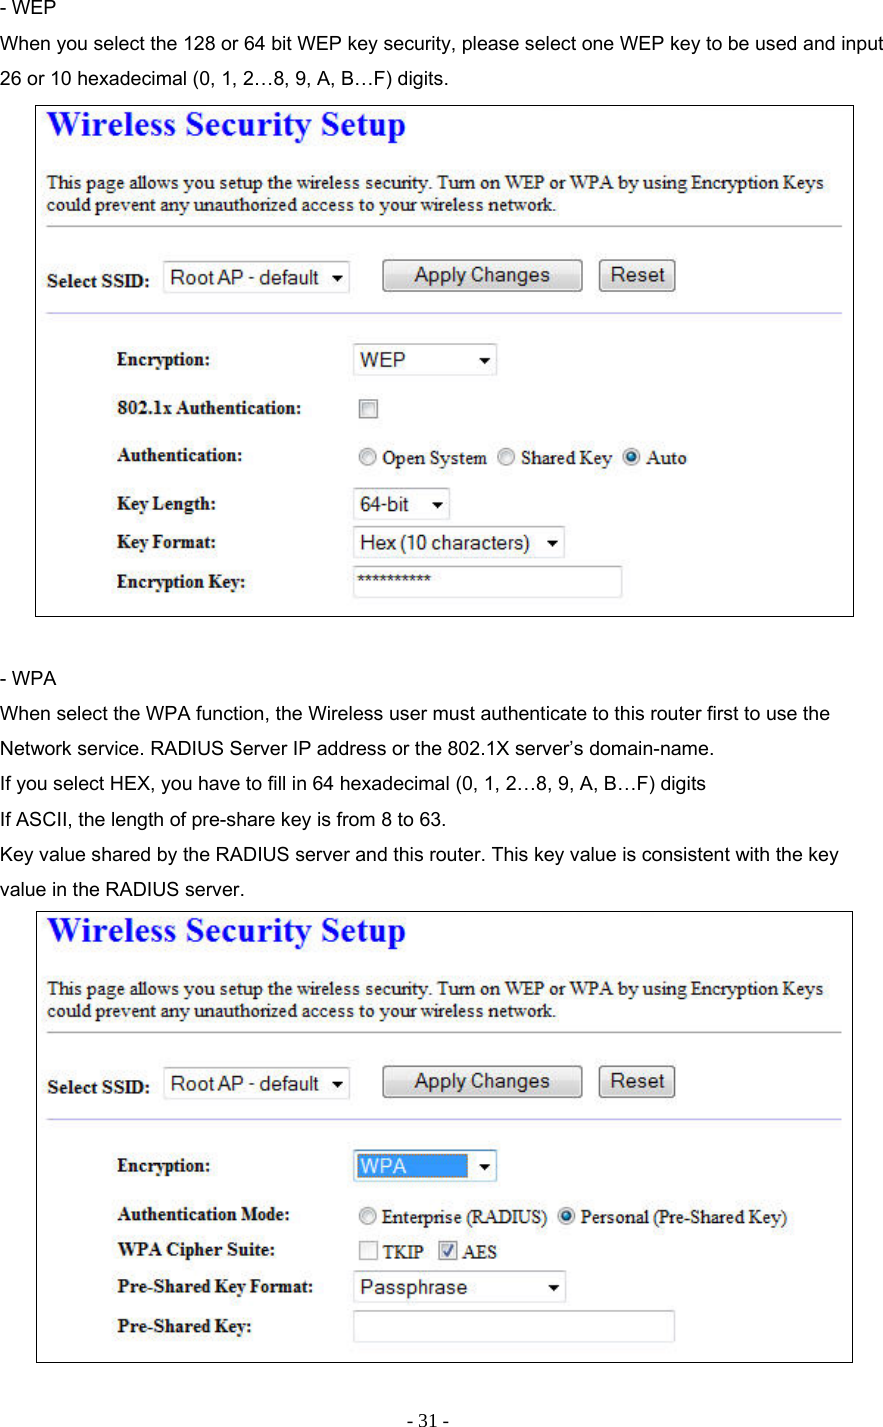 - 31 - - WEP When you select the 128 or 64 bit WEP key security, please select one WEP key to be used and input 26 or 10 hexadecimal (0, 1, 2…8, 9, A, B…F) digits.   - WPA When select the WPA function, the Wireless user must authenticate to this router first to use the Network service. RADIUS Server IP address or the 802.1X server’s domain-name.  If you select HEX, you have to fill in 64 hexadecimal (0, 1, 2…8, 9, A, B…F) digits If ASCII, the length of pre-share key is from 8 to 63. Key value shared by the RADIUS server and this router. This key value is consistent with the key value in the RADIUS server.   